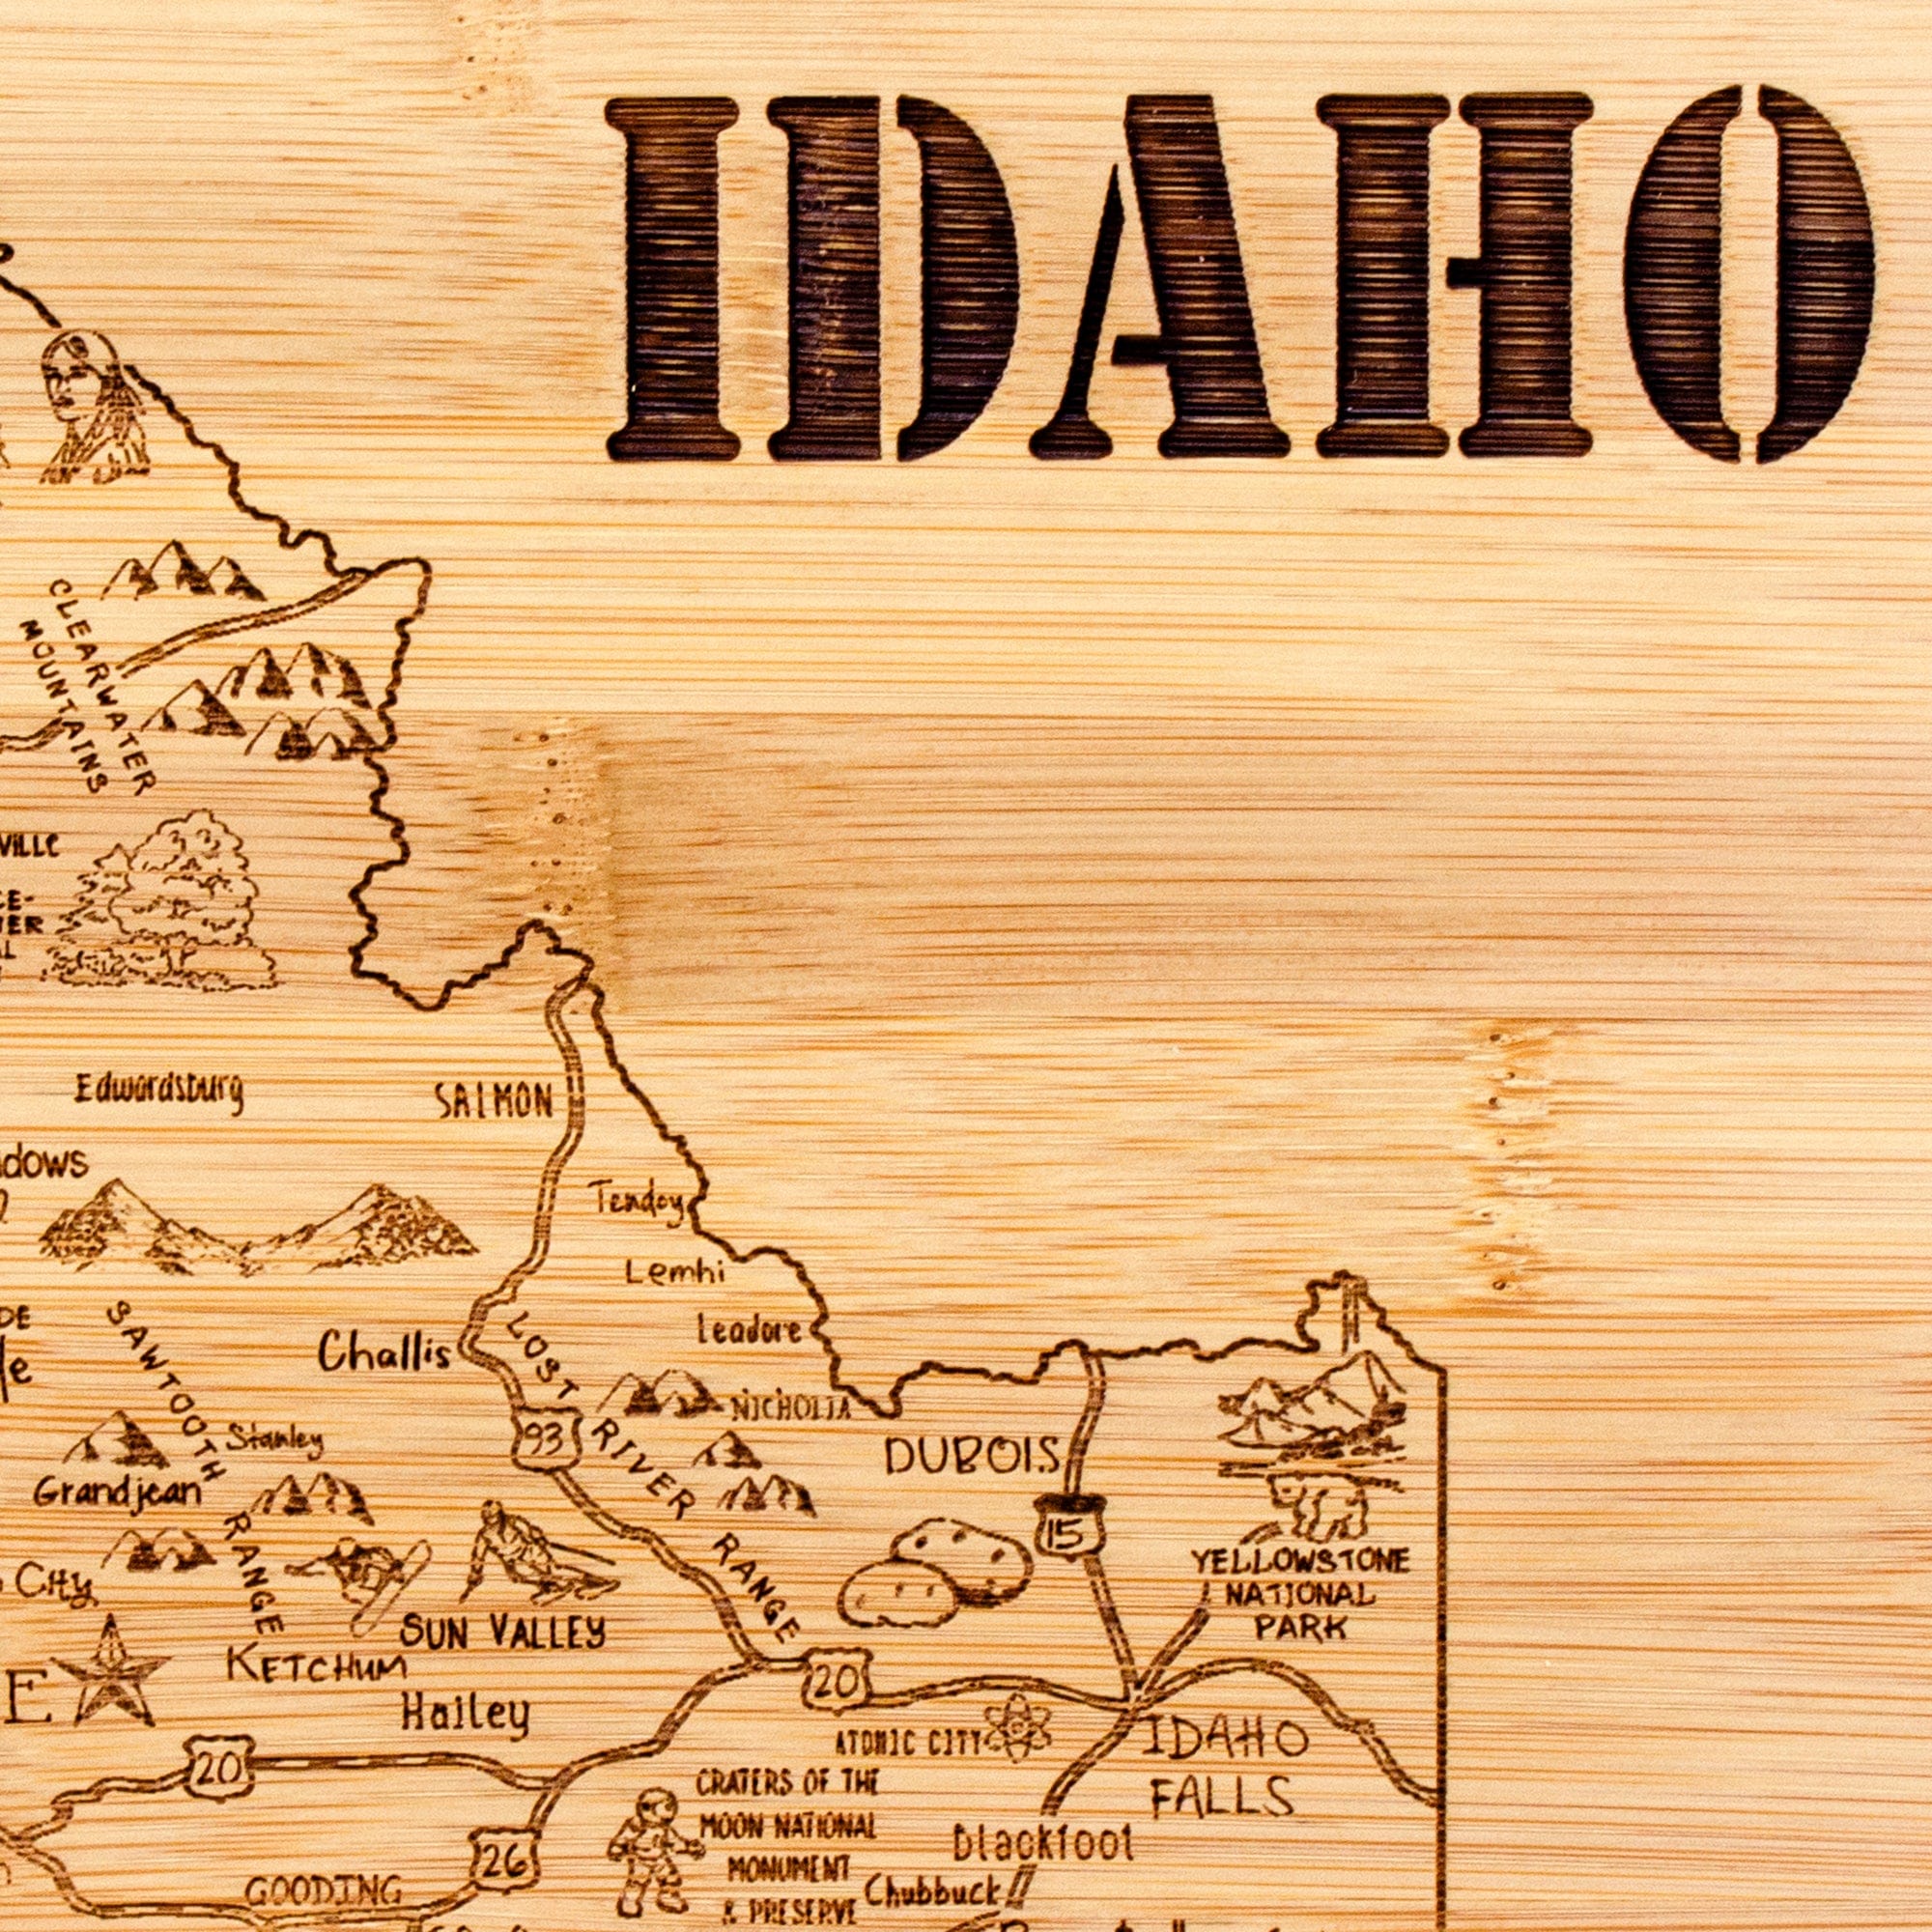 Totally Bamboo A Slice of Life Idaho Serving and Cutting Board, 11" x 8-3/4"